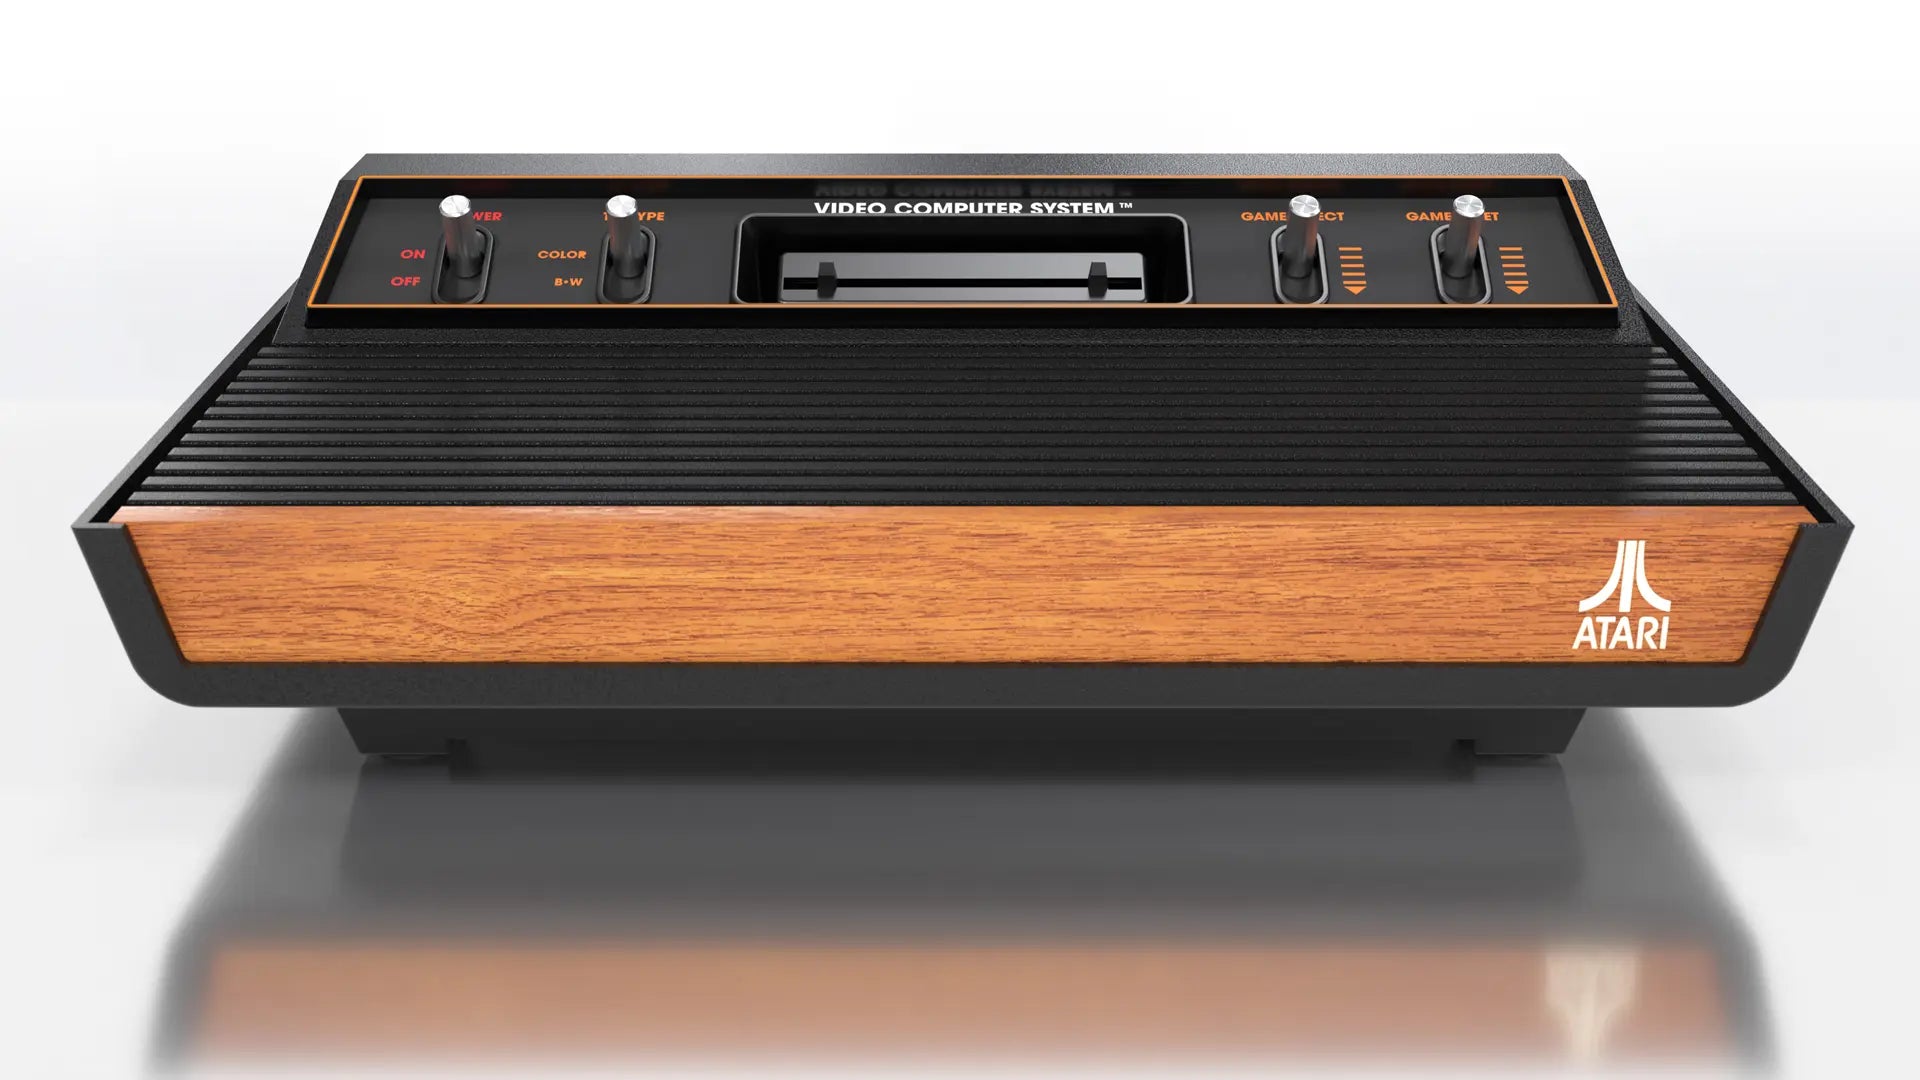 The Atari 2600+ Is a Brand New Version of the Classic 8-Bit Game Console